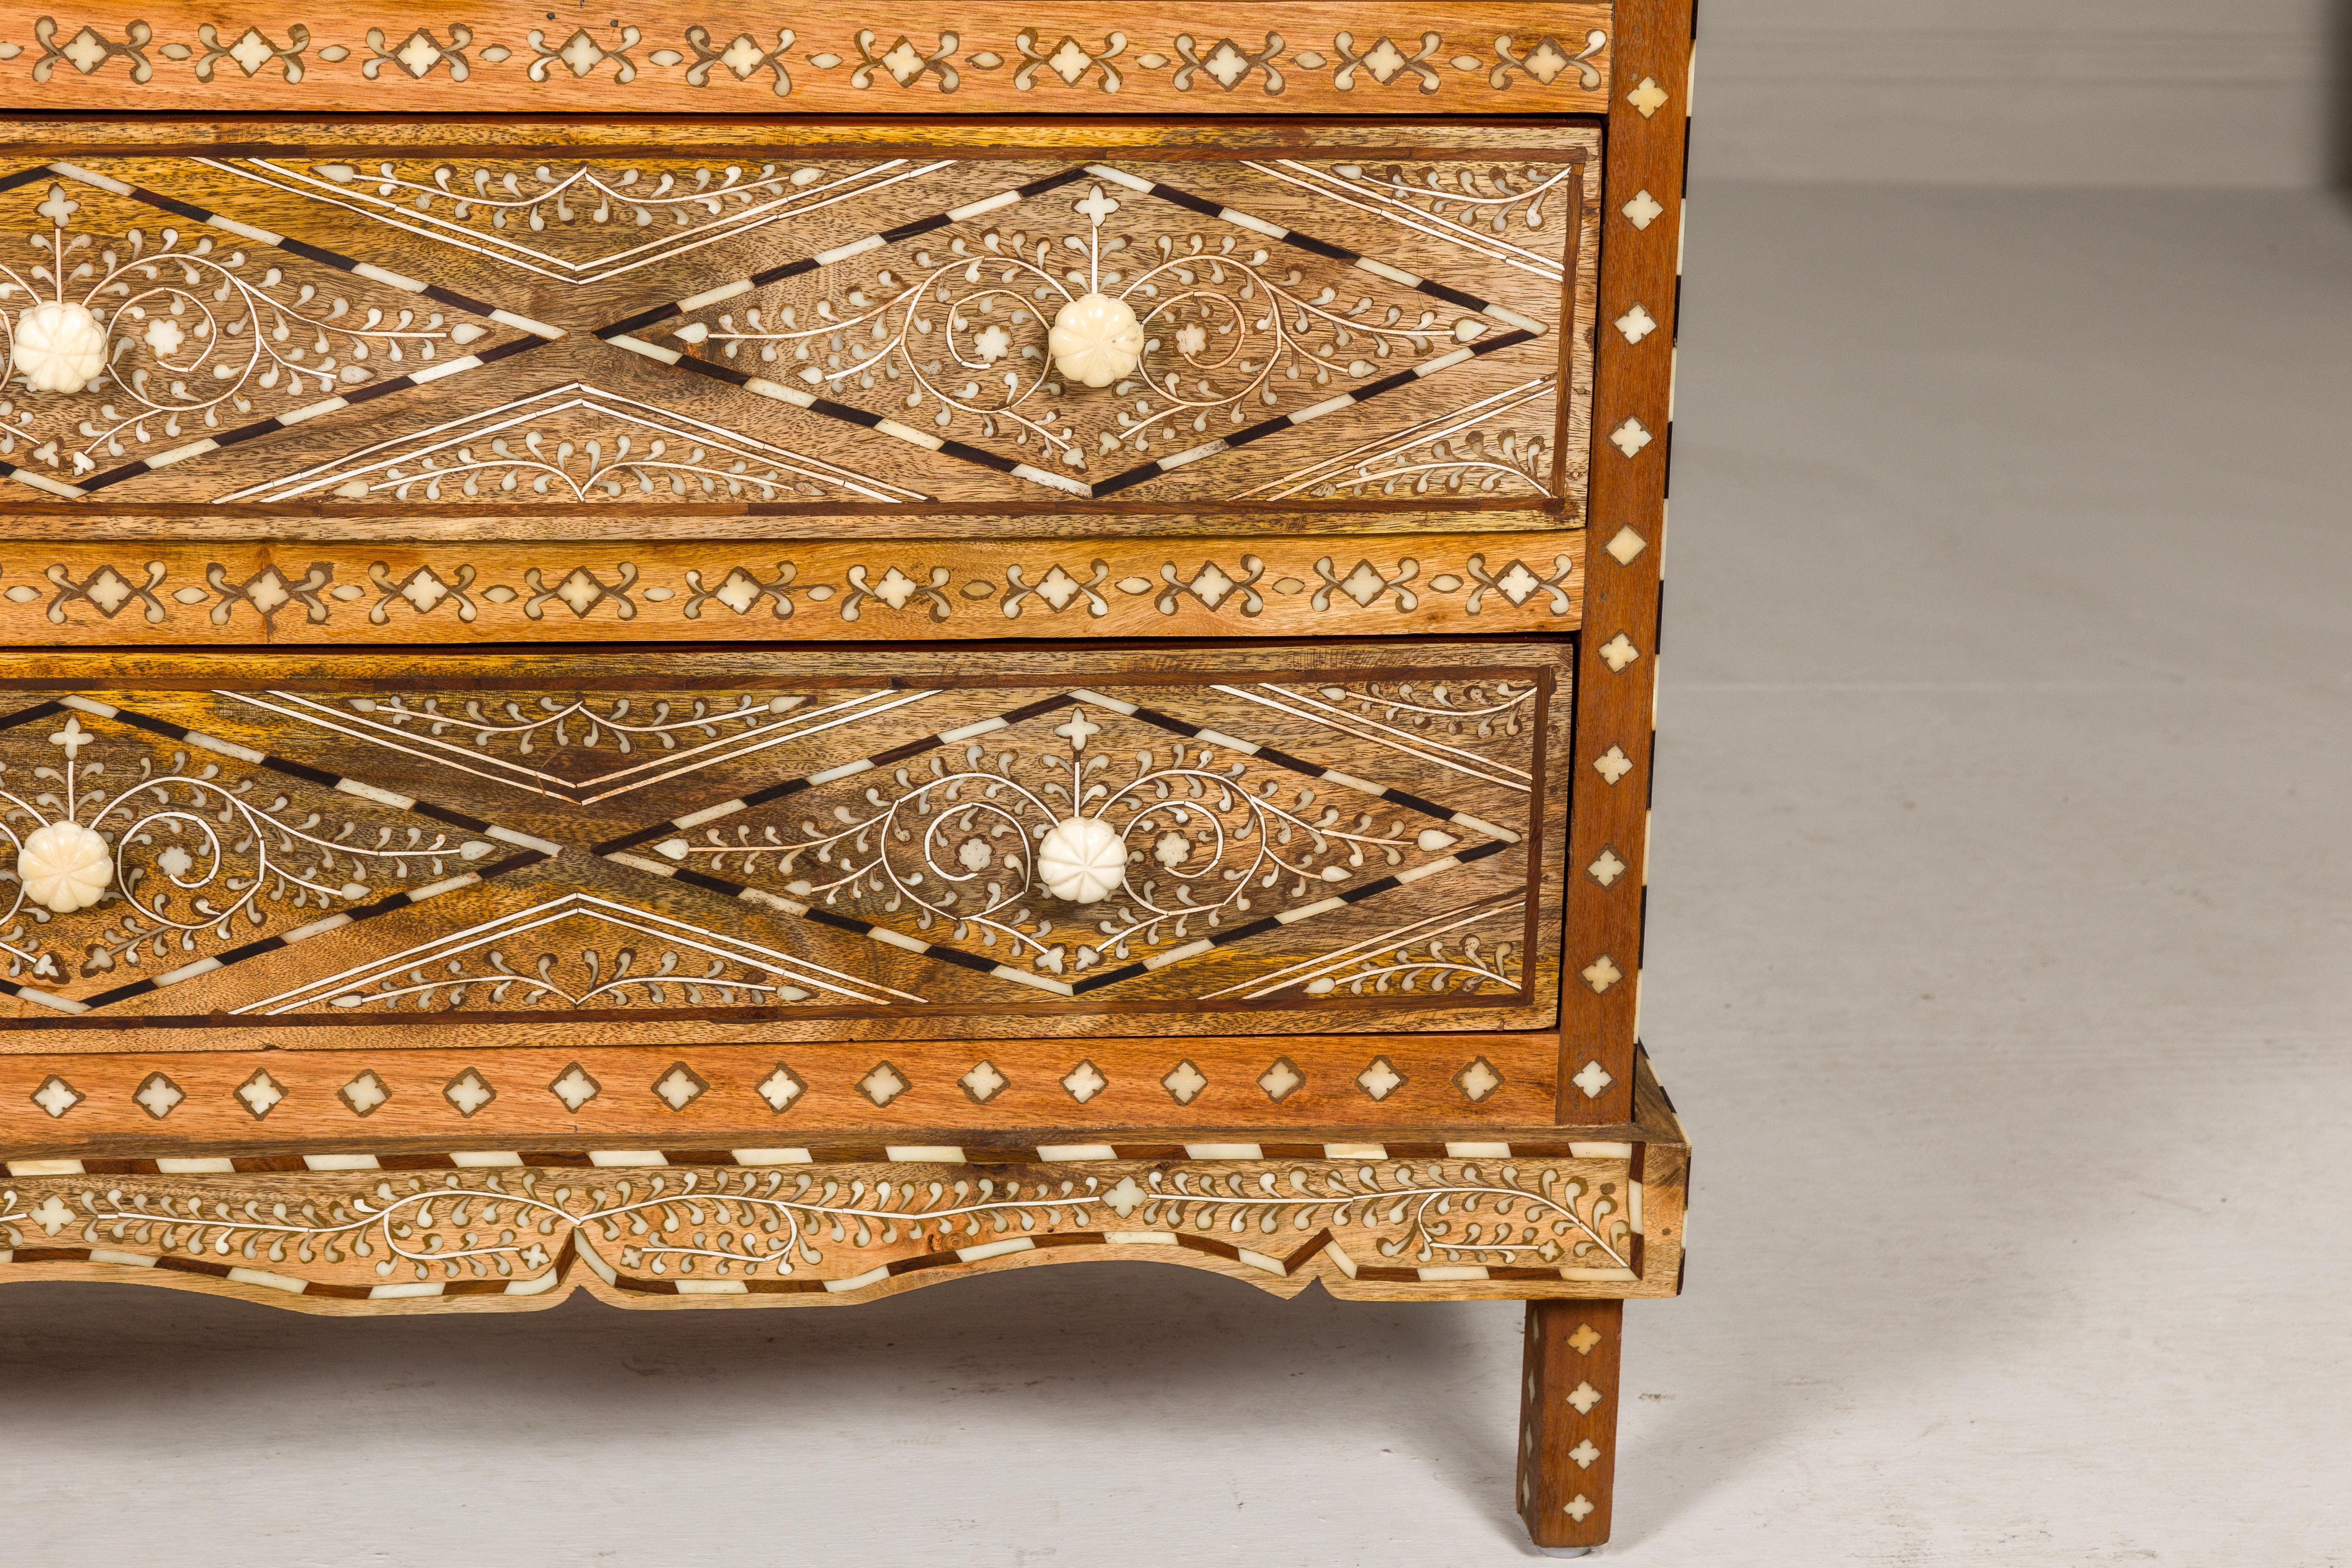 Contemporary Anglo-Indian Style Mango Wood Four-Drawer Chest with Foliage Themed Bone Inlay For Sale